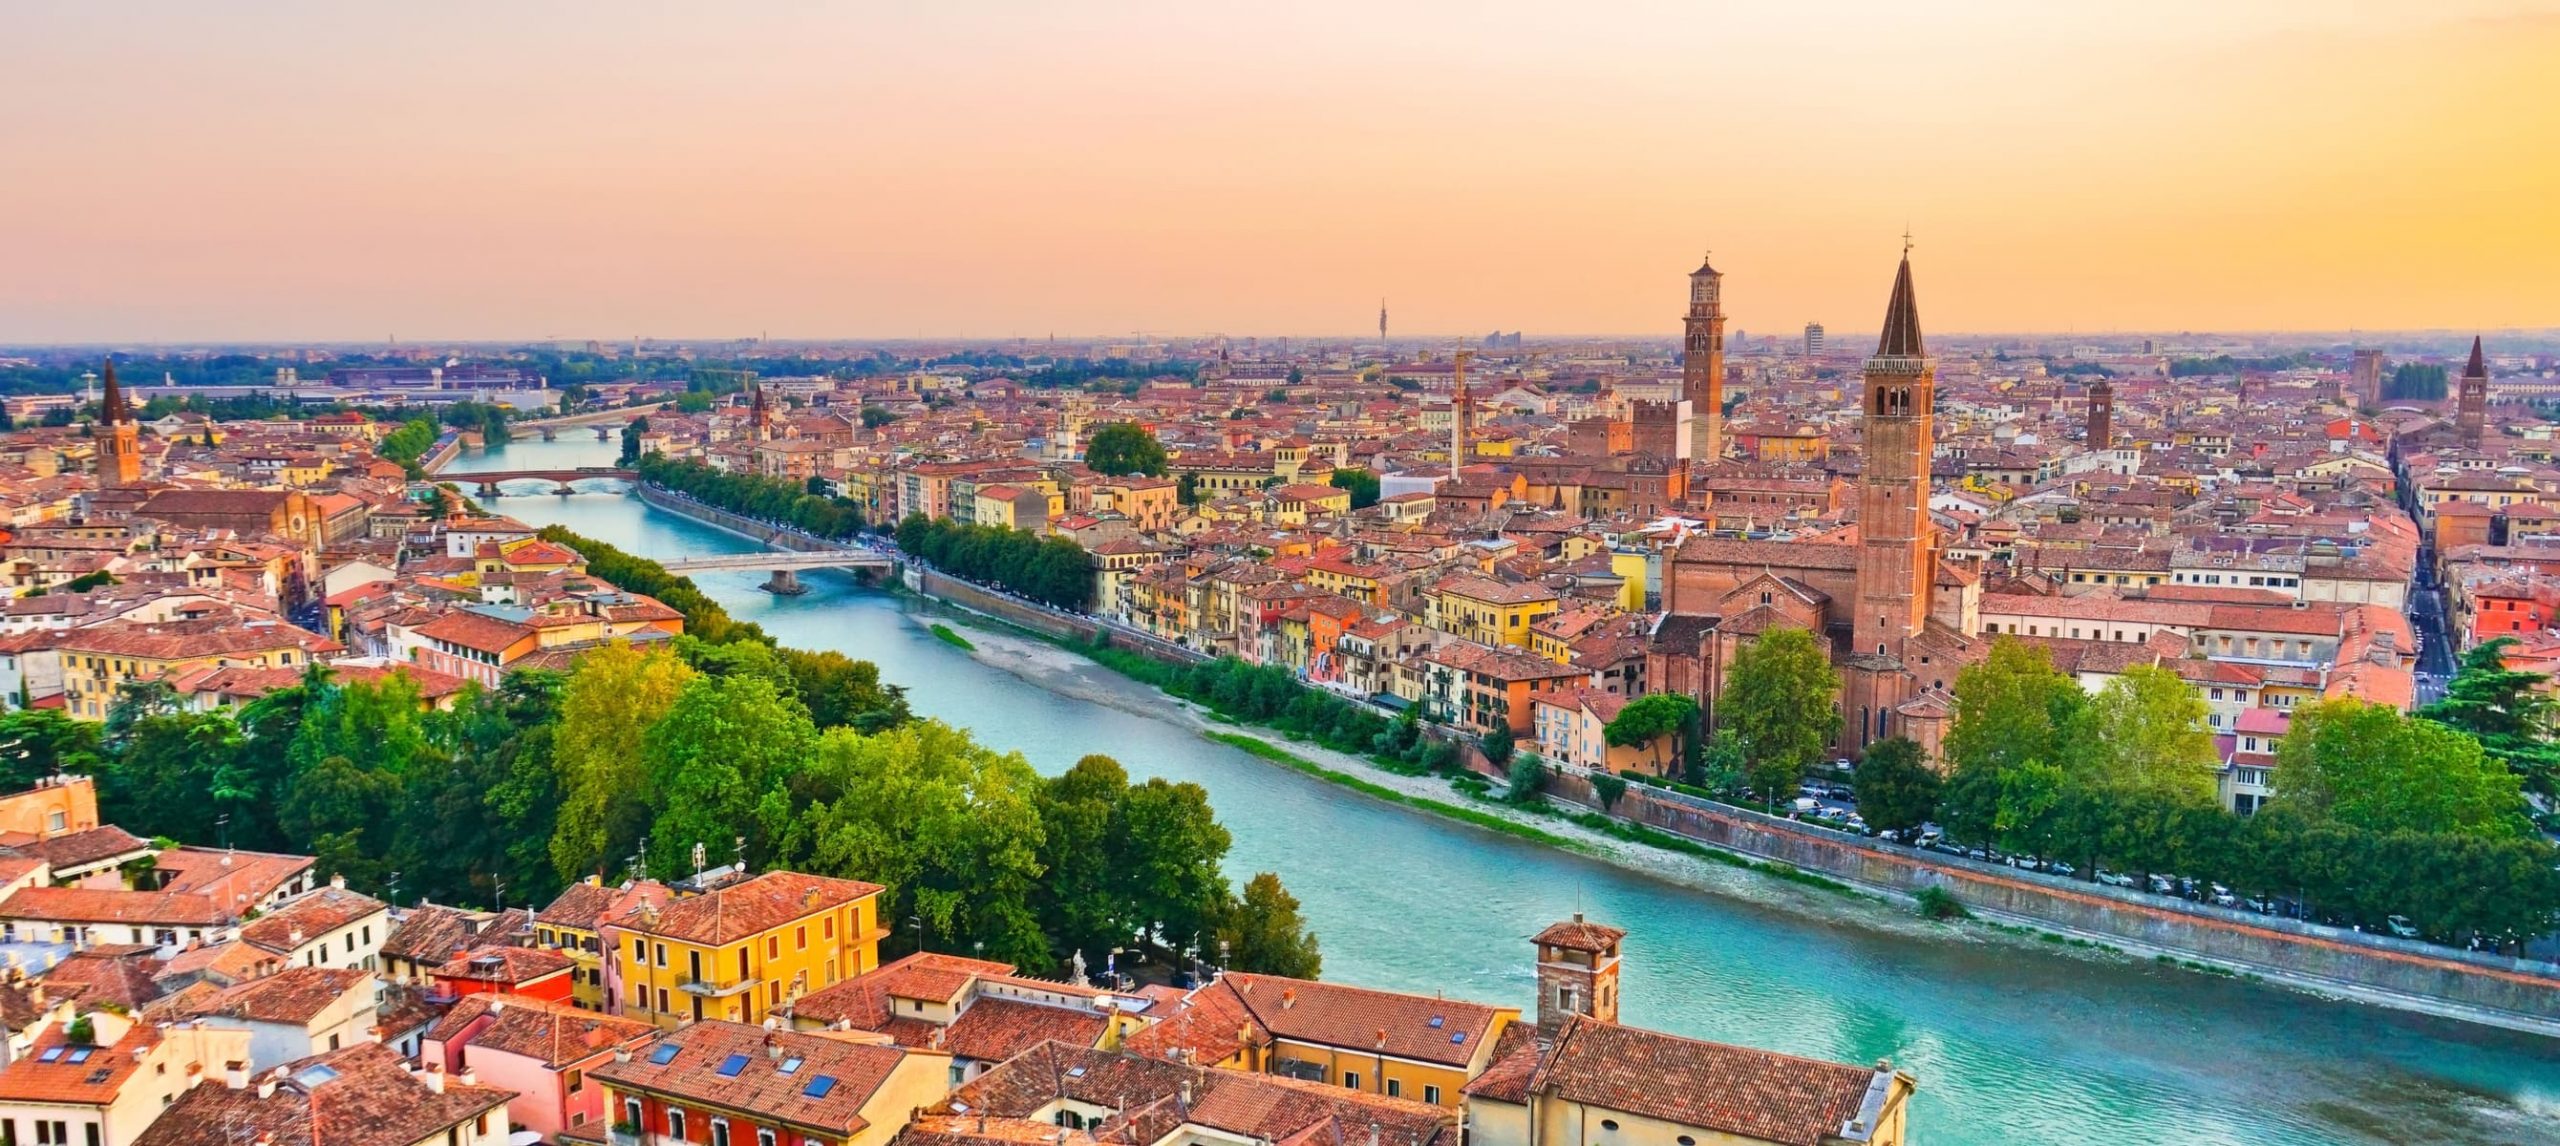 6 Things To do In Verona, CuddlyNest